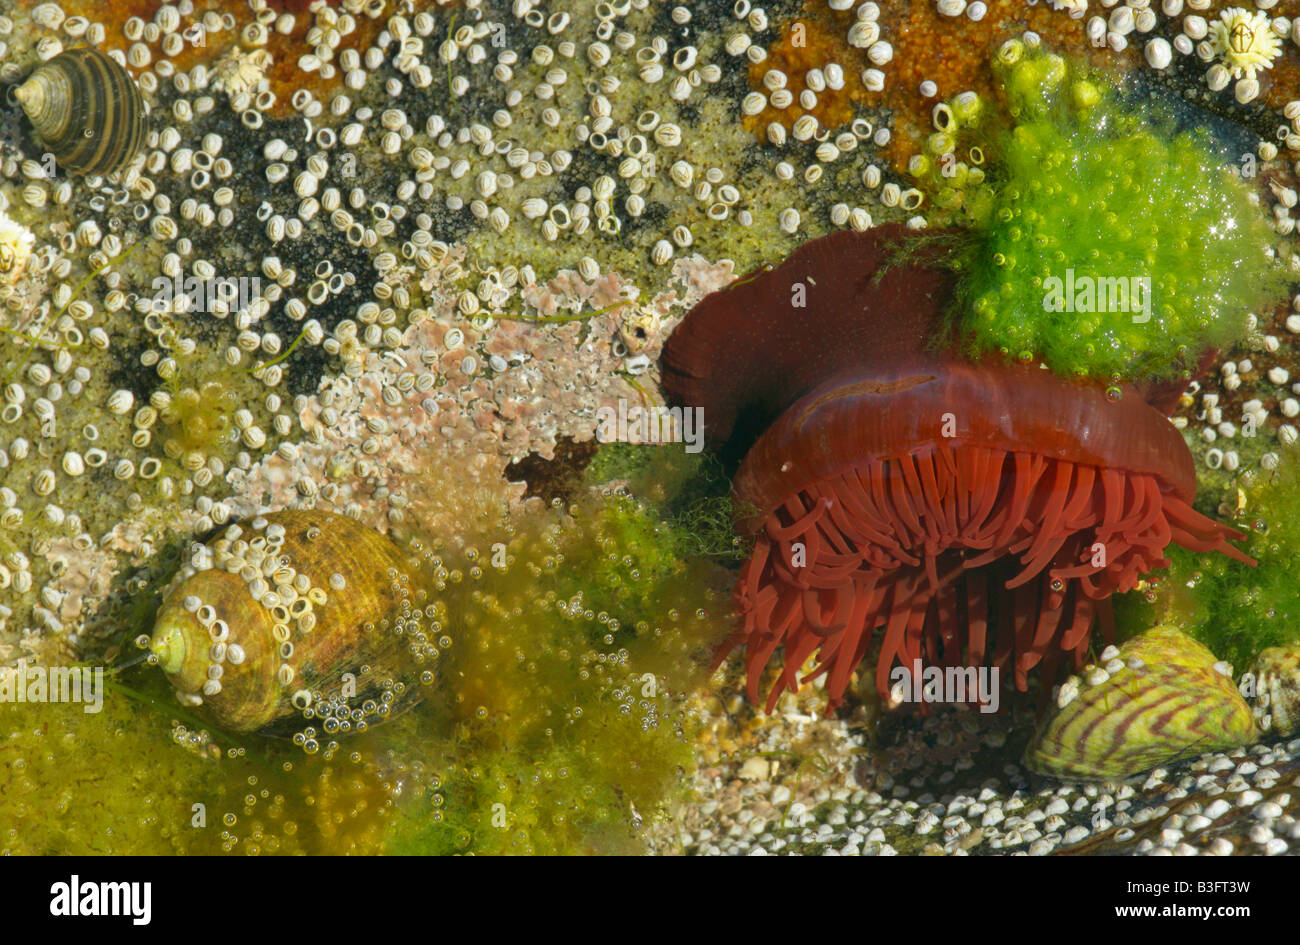 rock pool with opened tentacles reaching for food Similar to jellyfish anemones Stock Photo